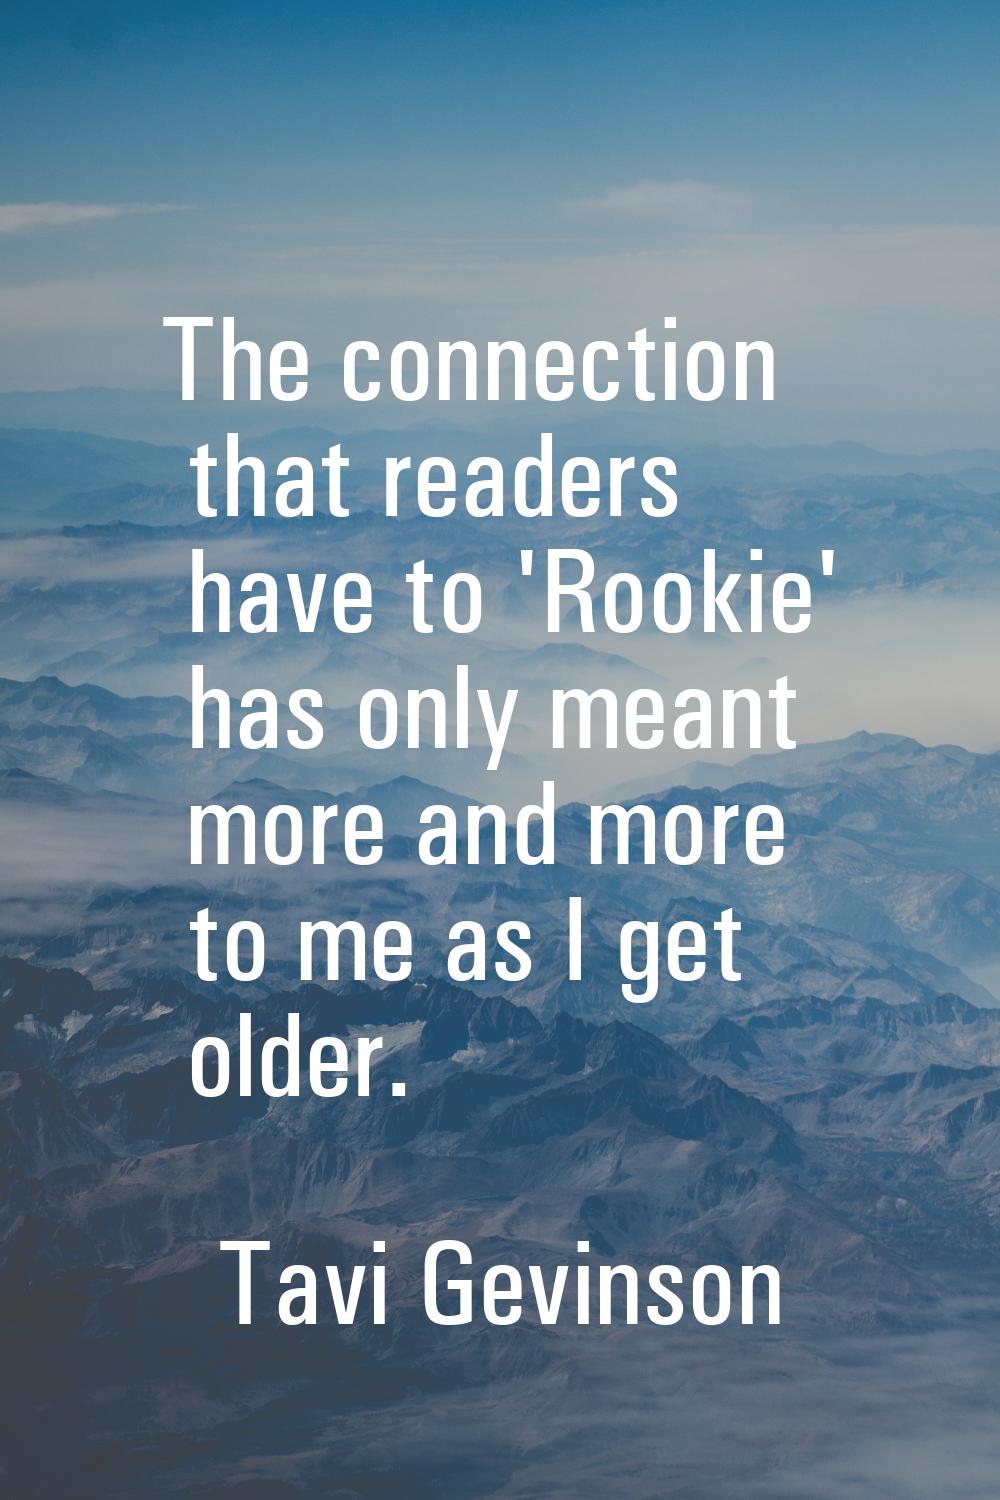 The connection that readers have to 'Rookie' has only meant more and more to me as I get older.